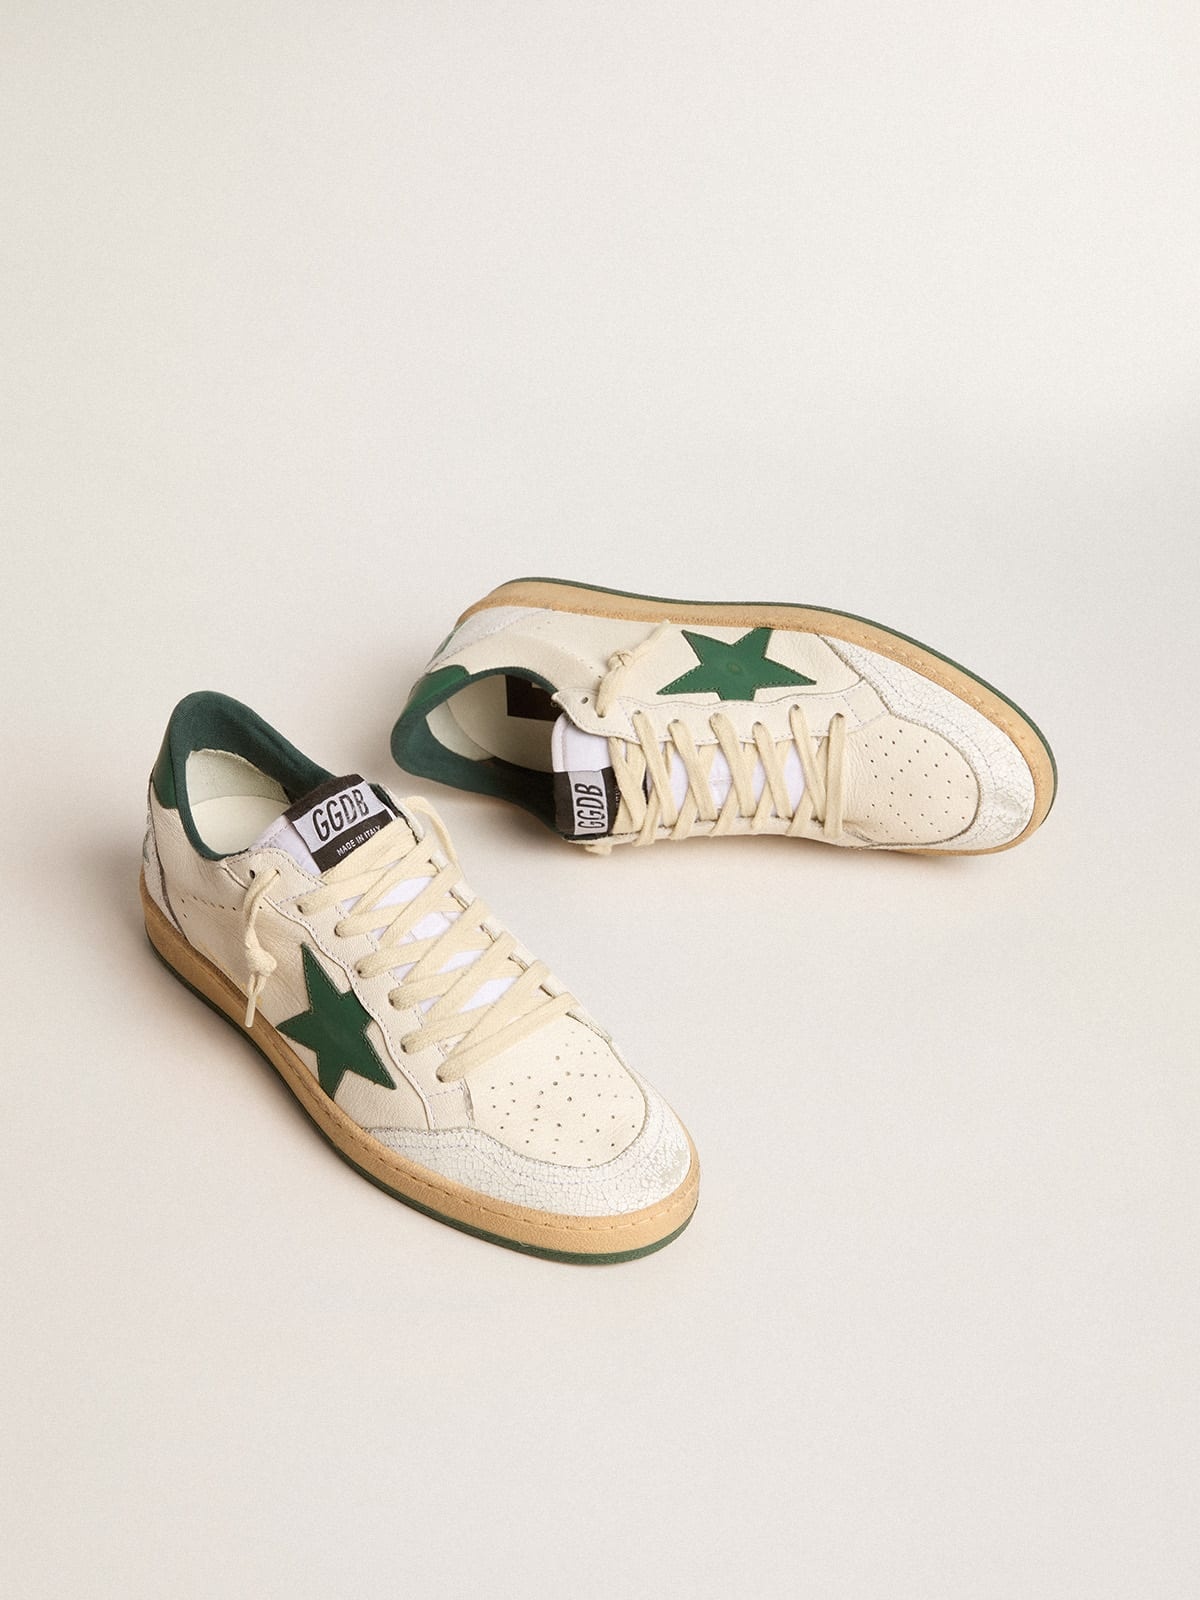 Men's Ball Star Wishes in white nappa leather with green leather star and heel tab - 3